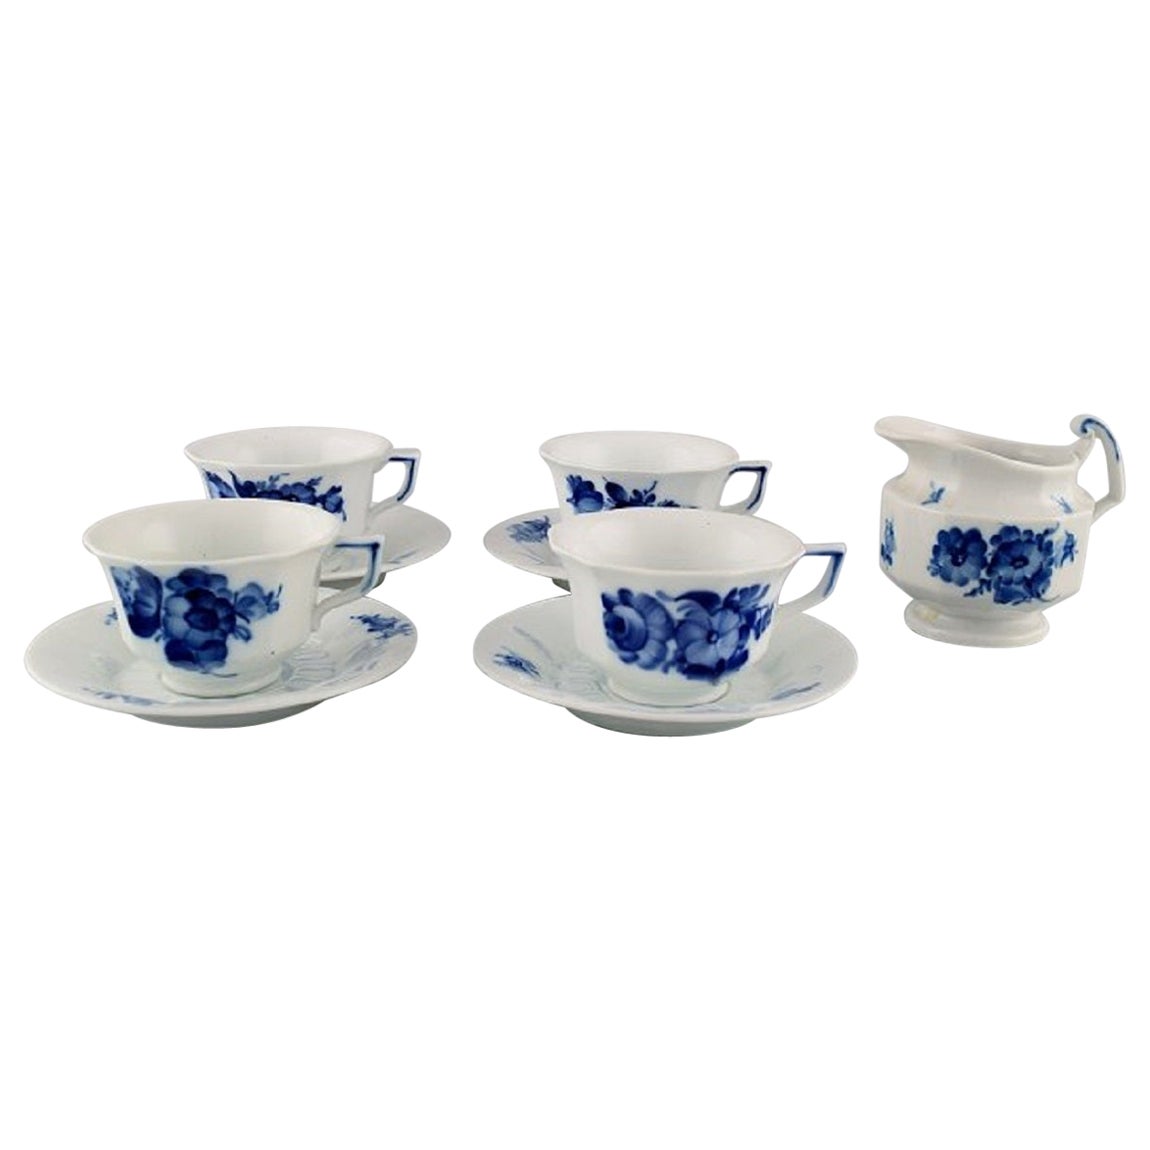 Four Royal Copenhagen Blue Flower Angular Coffee Cups with Saucers and Creamer